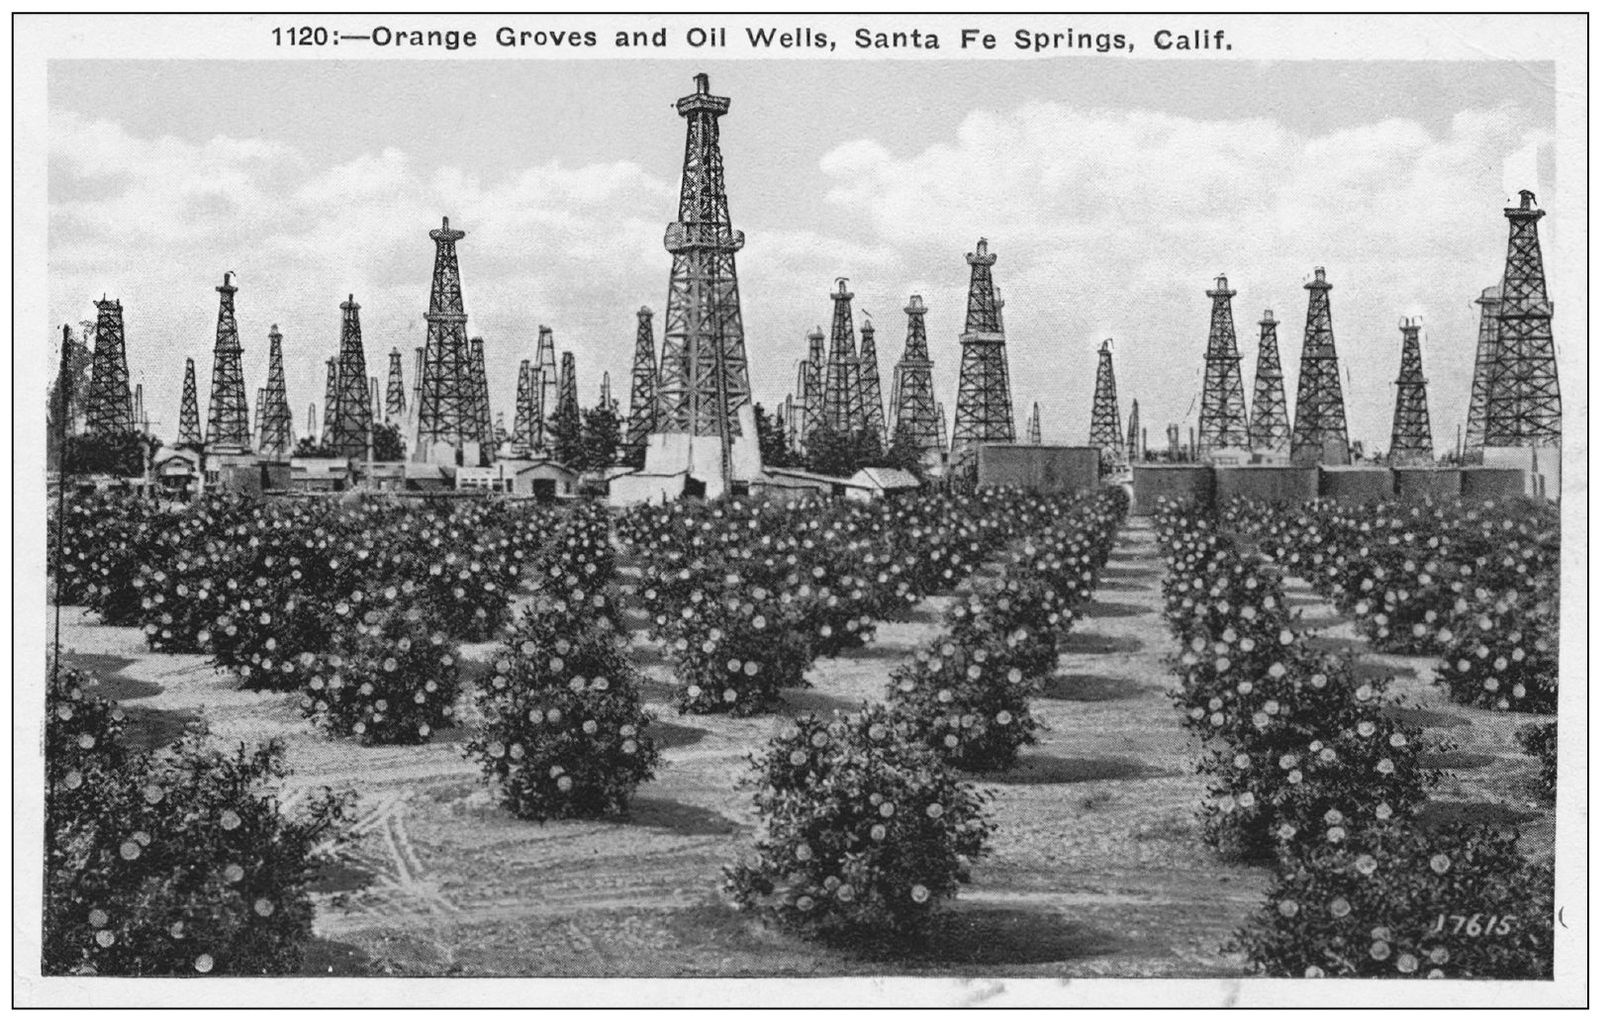 This postcard pictures an orange grove in Santa Fe Springs with oil derricks - photo 13